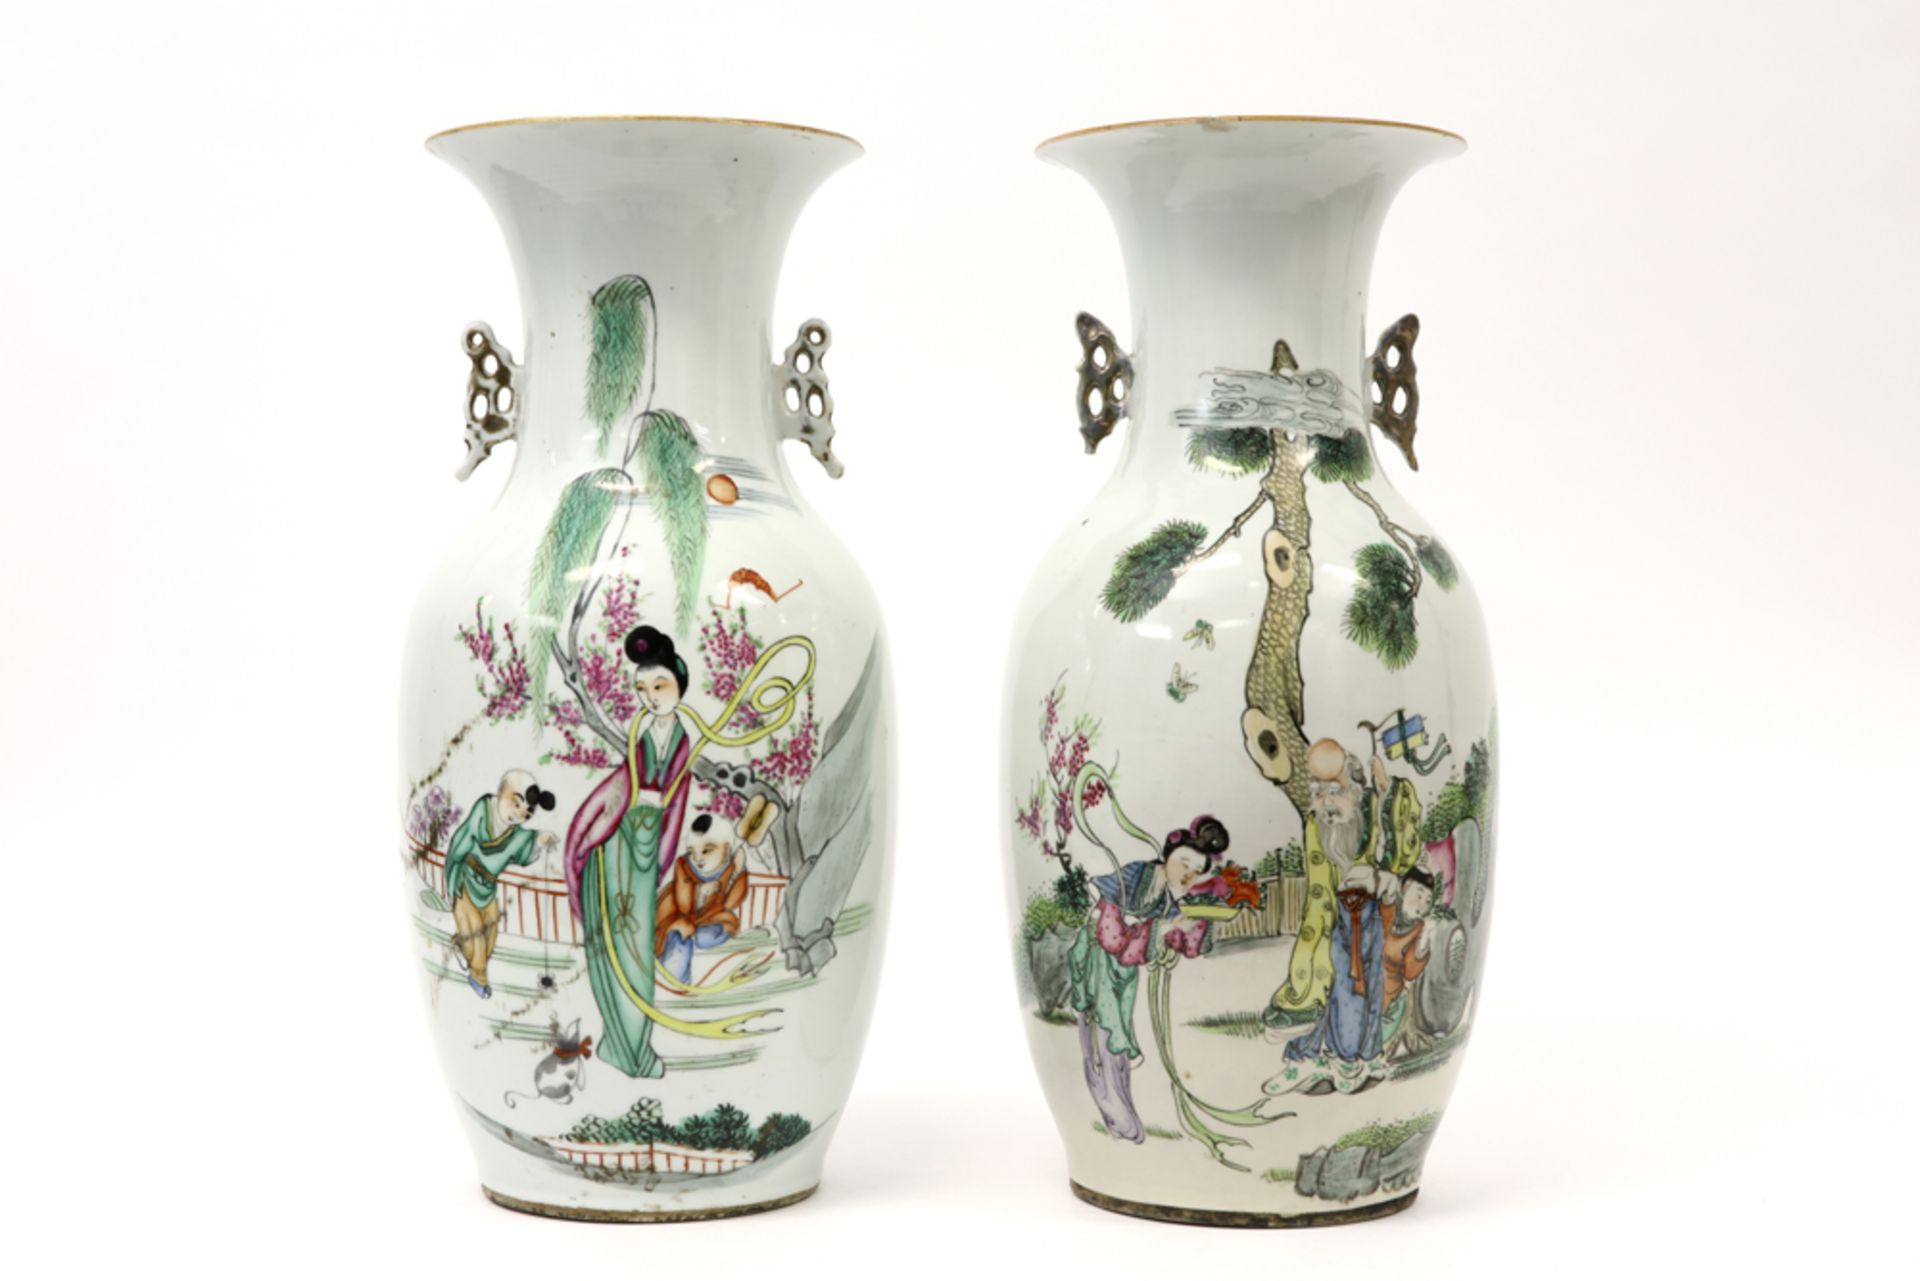 pair of Chinese vases in porcelain with polychrome decor, each with a Sage || Paar Chinese vazen